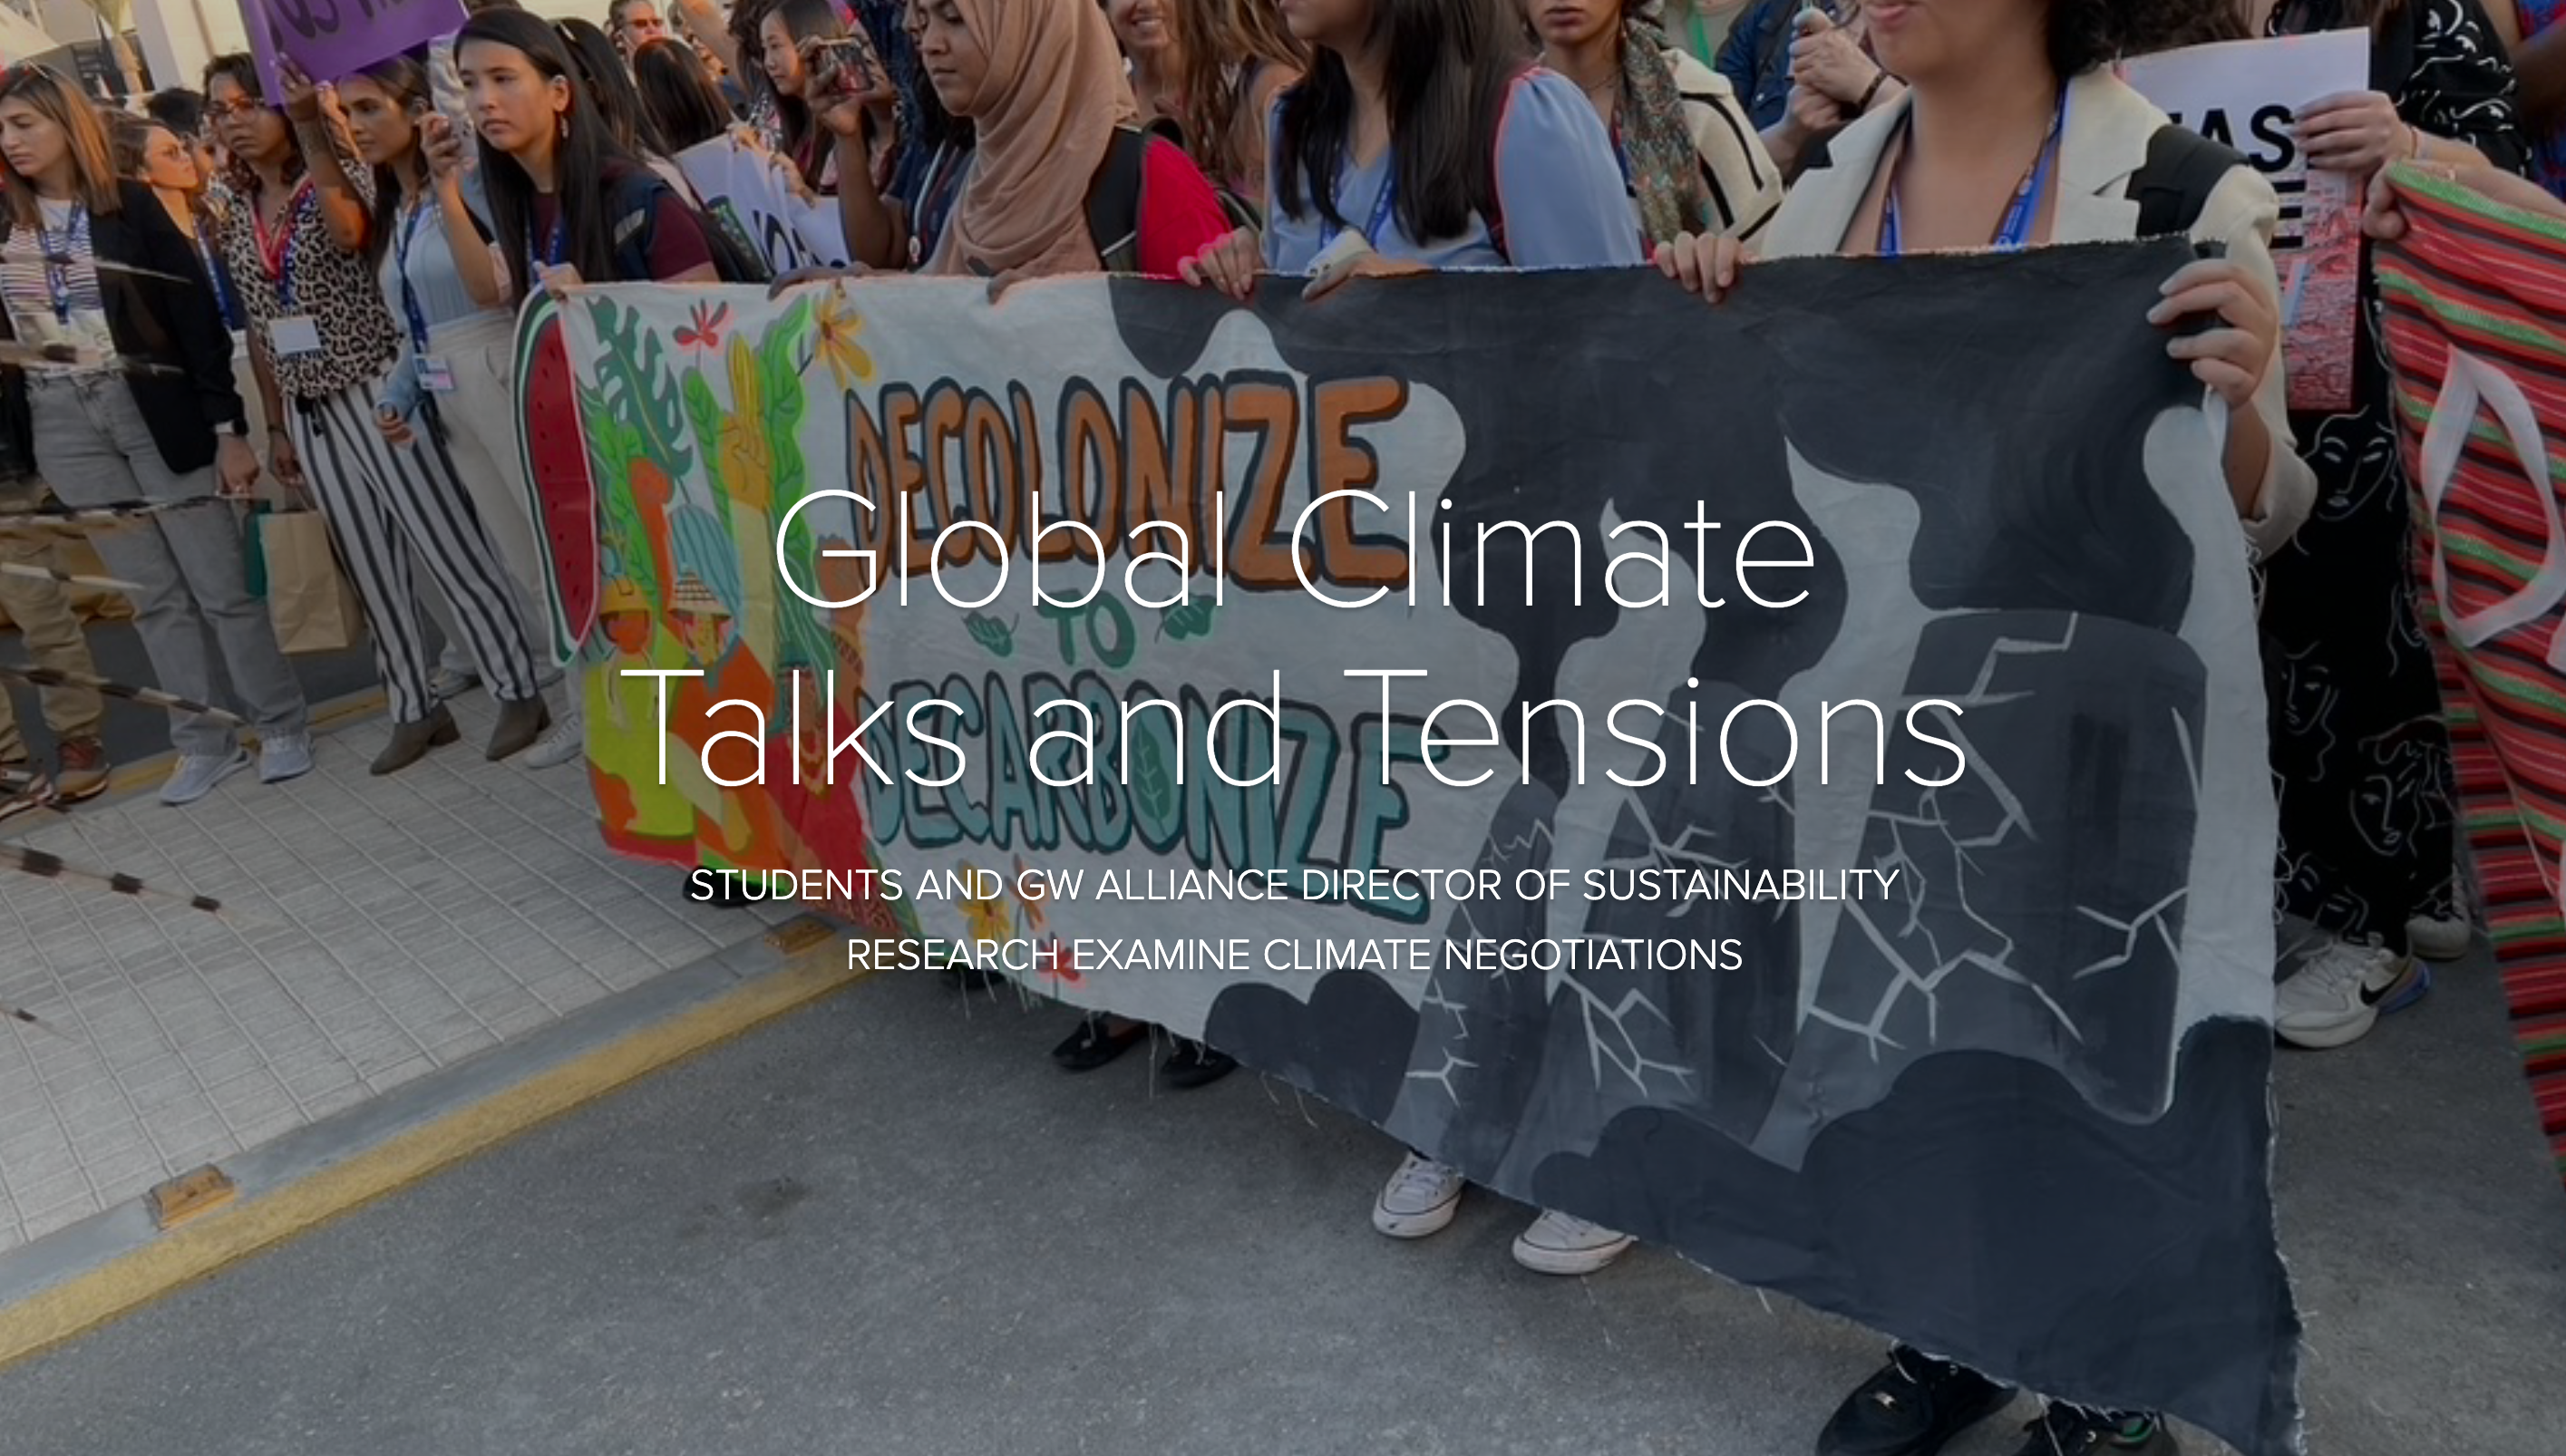 A group of students hold a colorful banner that reads "decolonize to decarbonize" at COP. The title reads in white text "Global Climate Talks and Tensions, Students and GW Alliance Director of Sustainability Research examine climate negotiations""